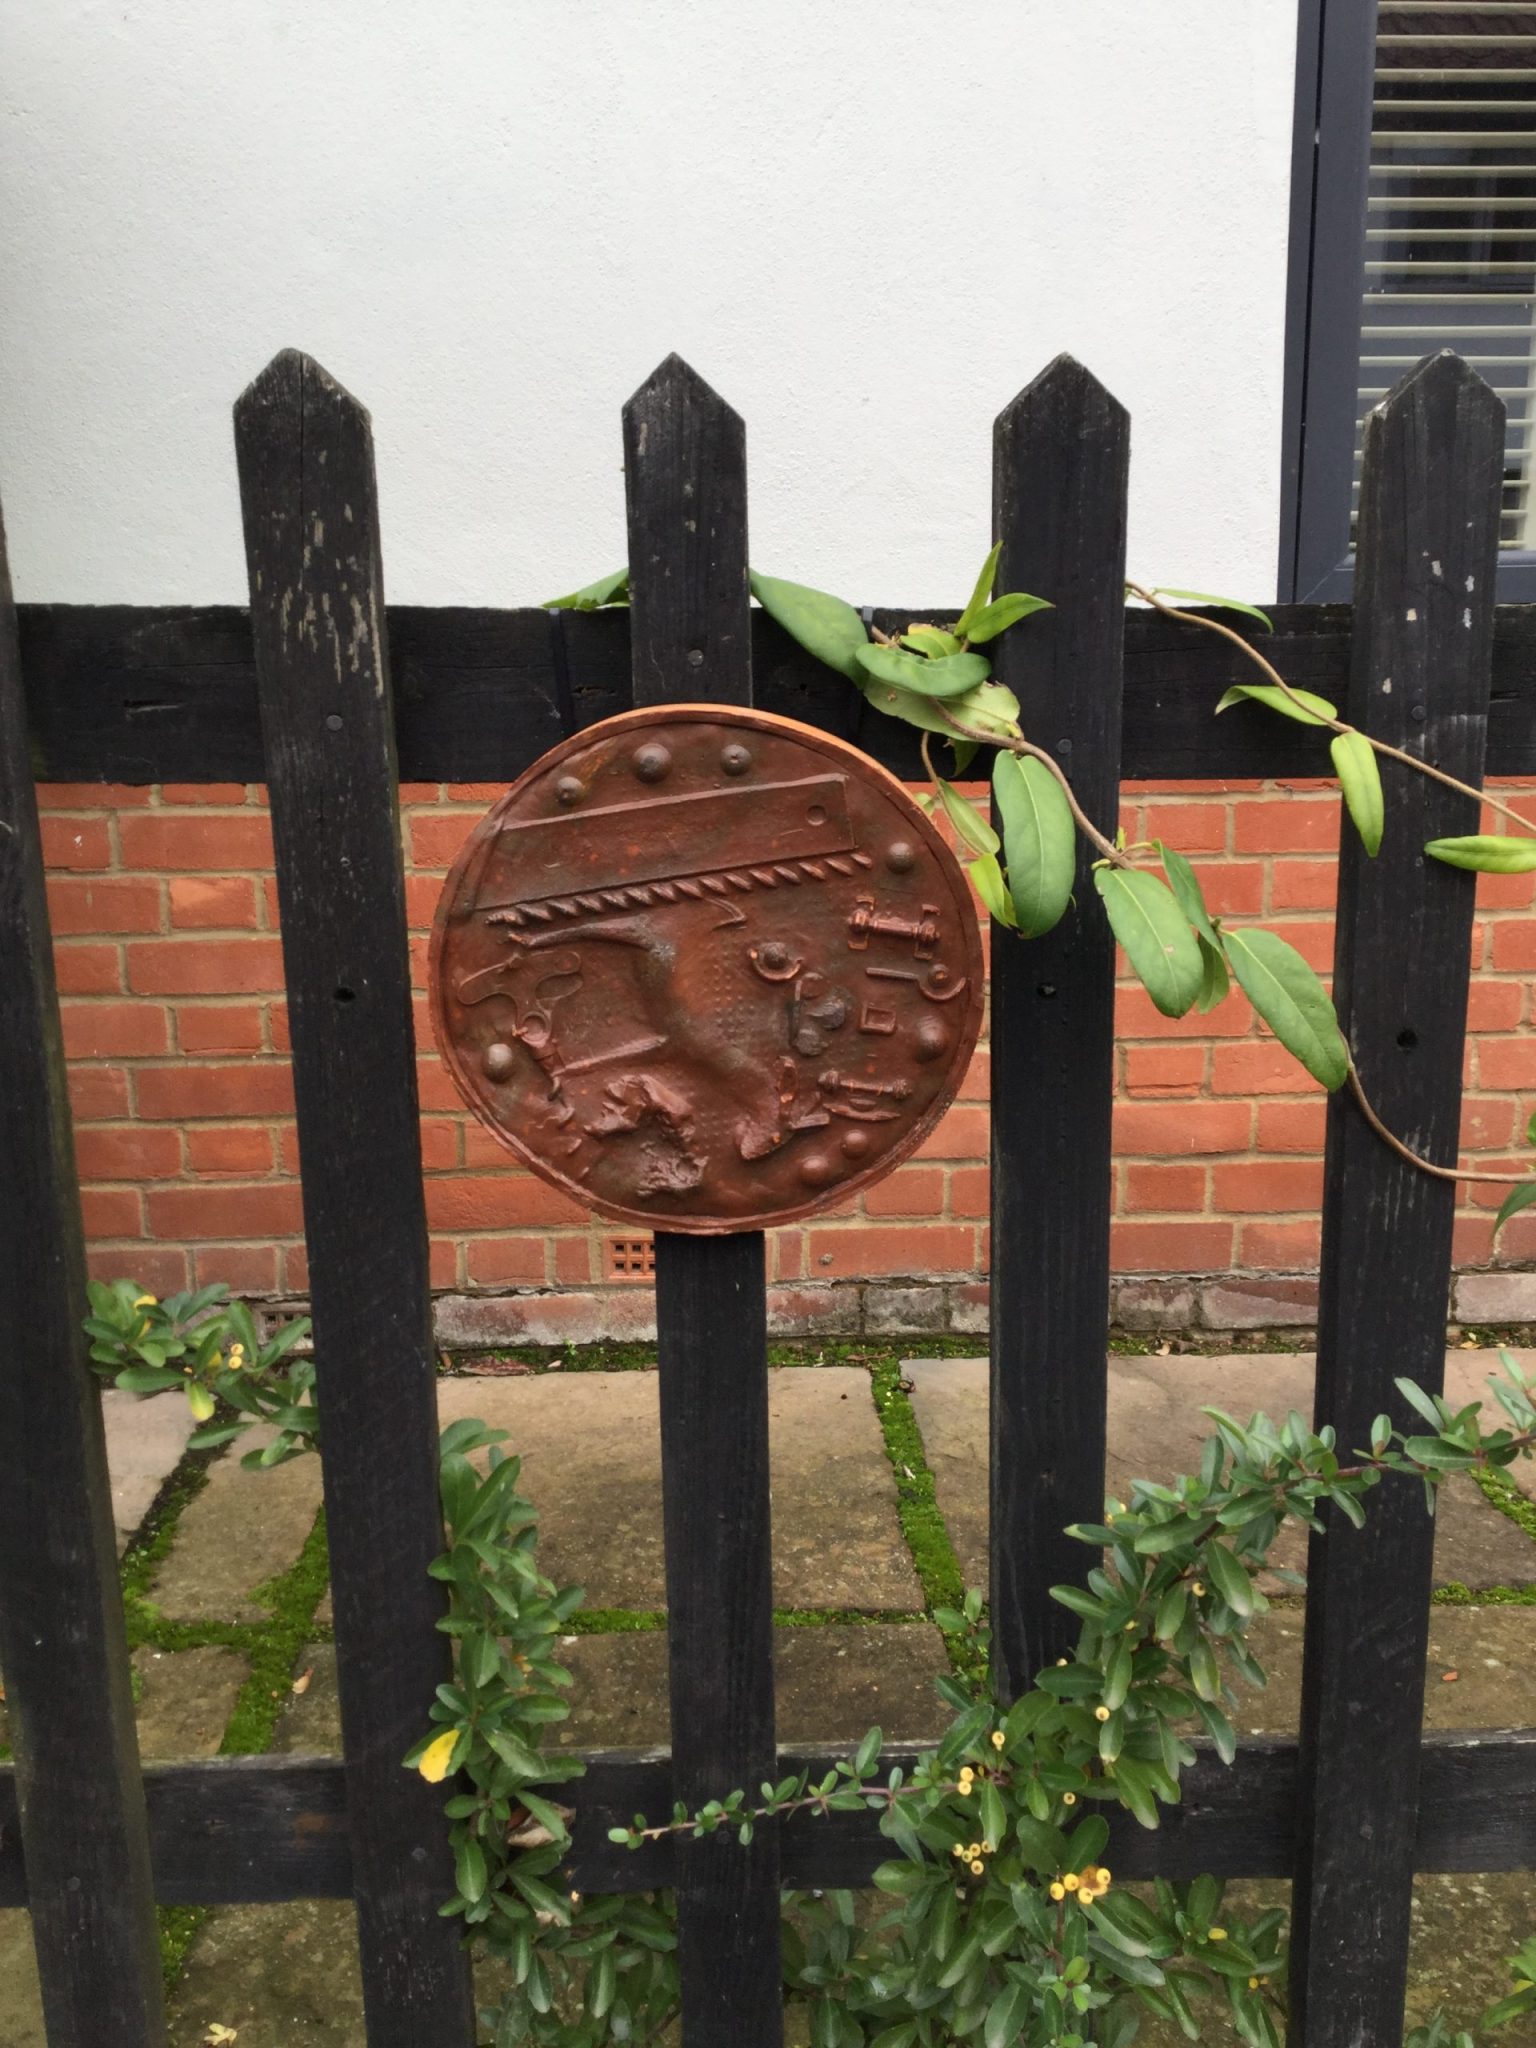 A brown circular plaque with several impressions including an old drill bit, a donkey and marbles